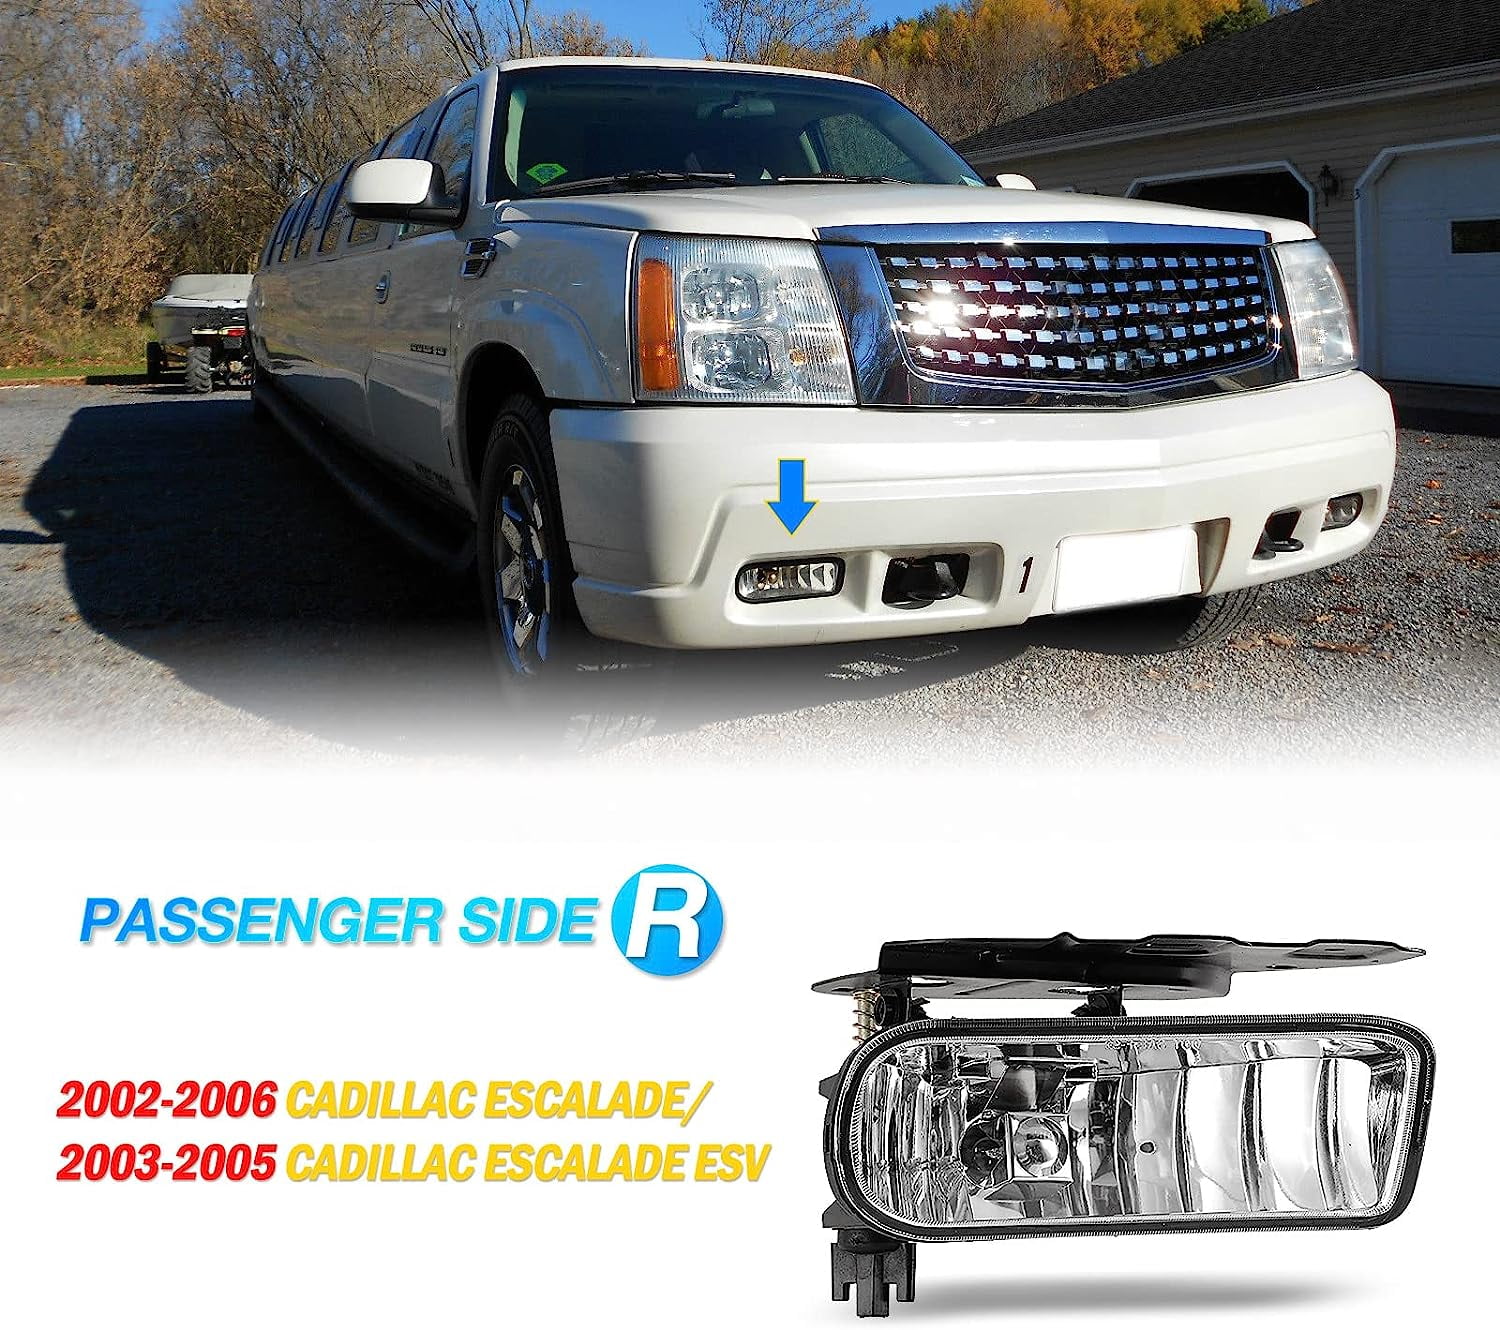  LED Fog Lights Assembly Replacement for [2002 2003 2004 2005  2006] Cadillac Escalade/ Escalade EXT/ Escalade ESV Driving Fog Lamps  (Clear Lens) : Automotive